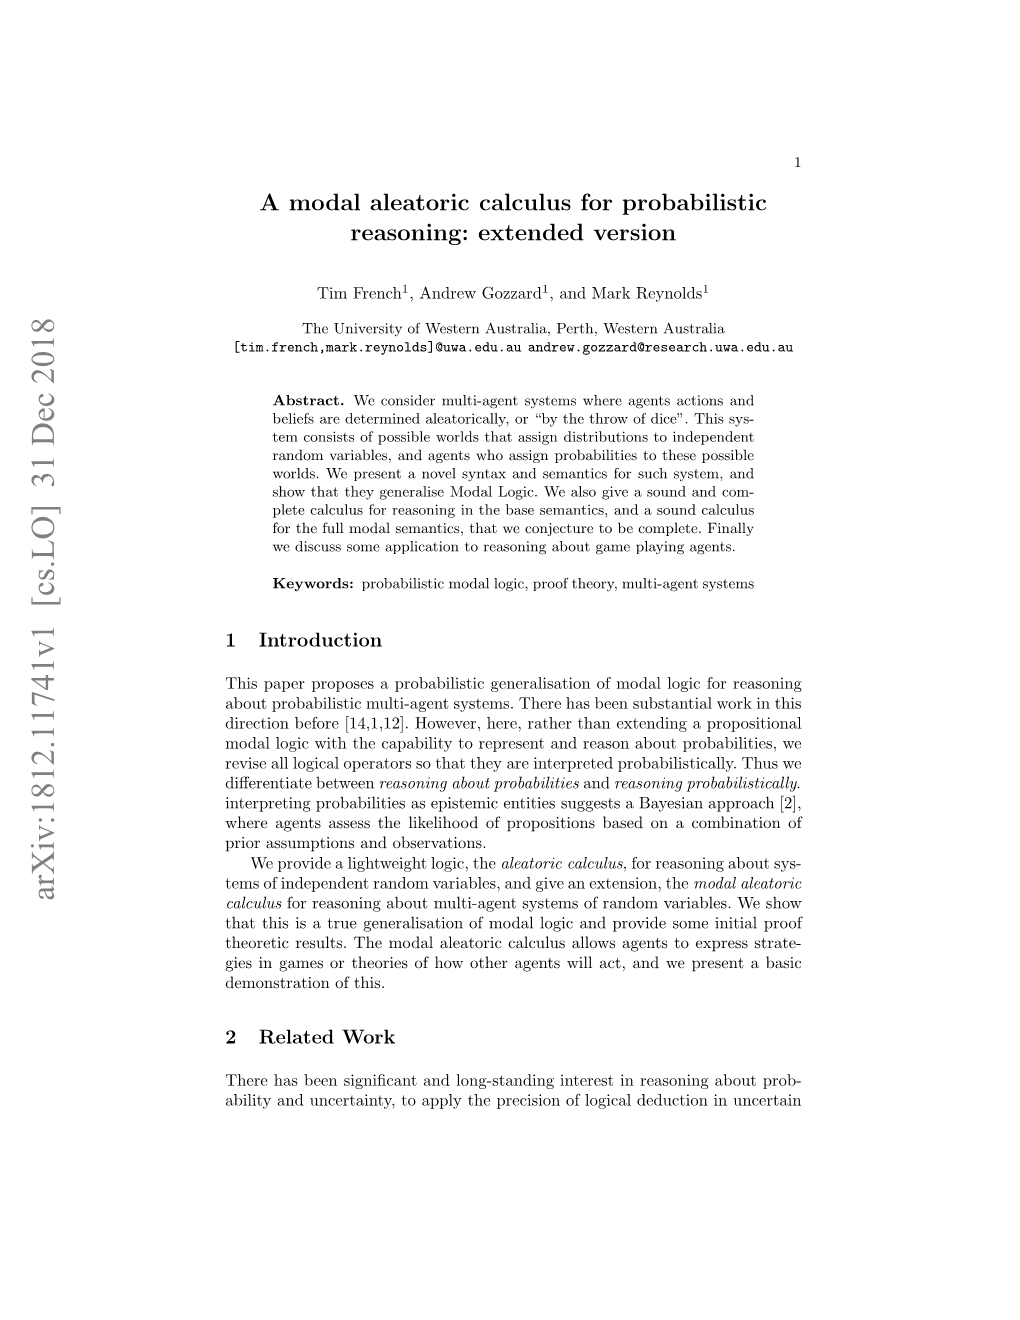 A Modal Aleatoric Calculus for Probabilistic Reasoning: Extended